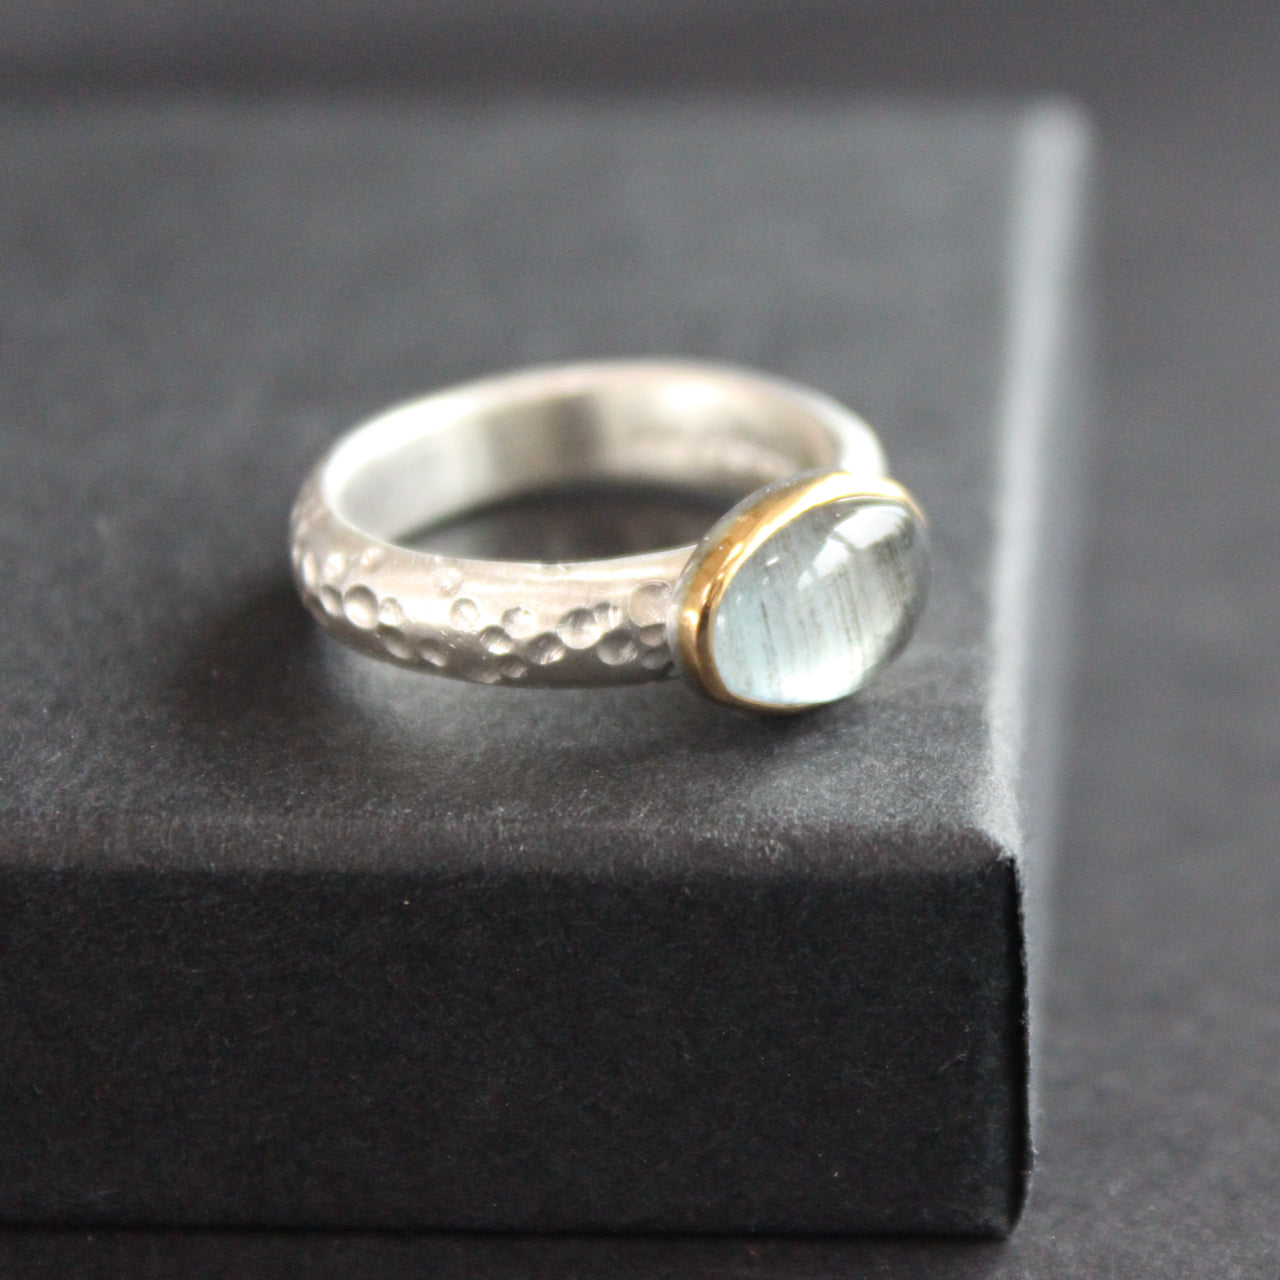 Moss aquamarine (oval) set in gold on textured ring in brushed silver by Carin Lindberg